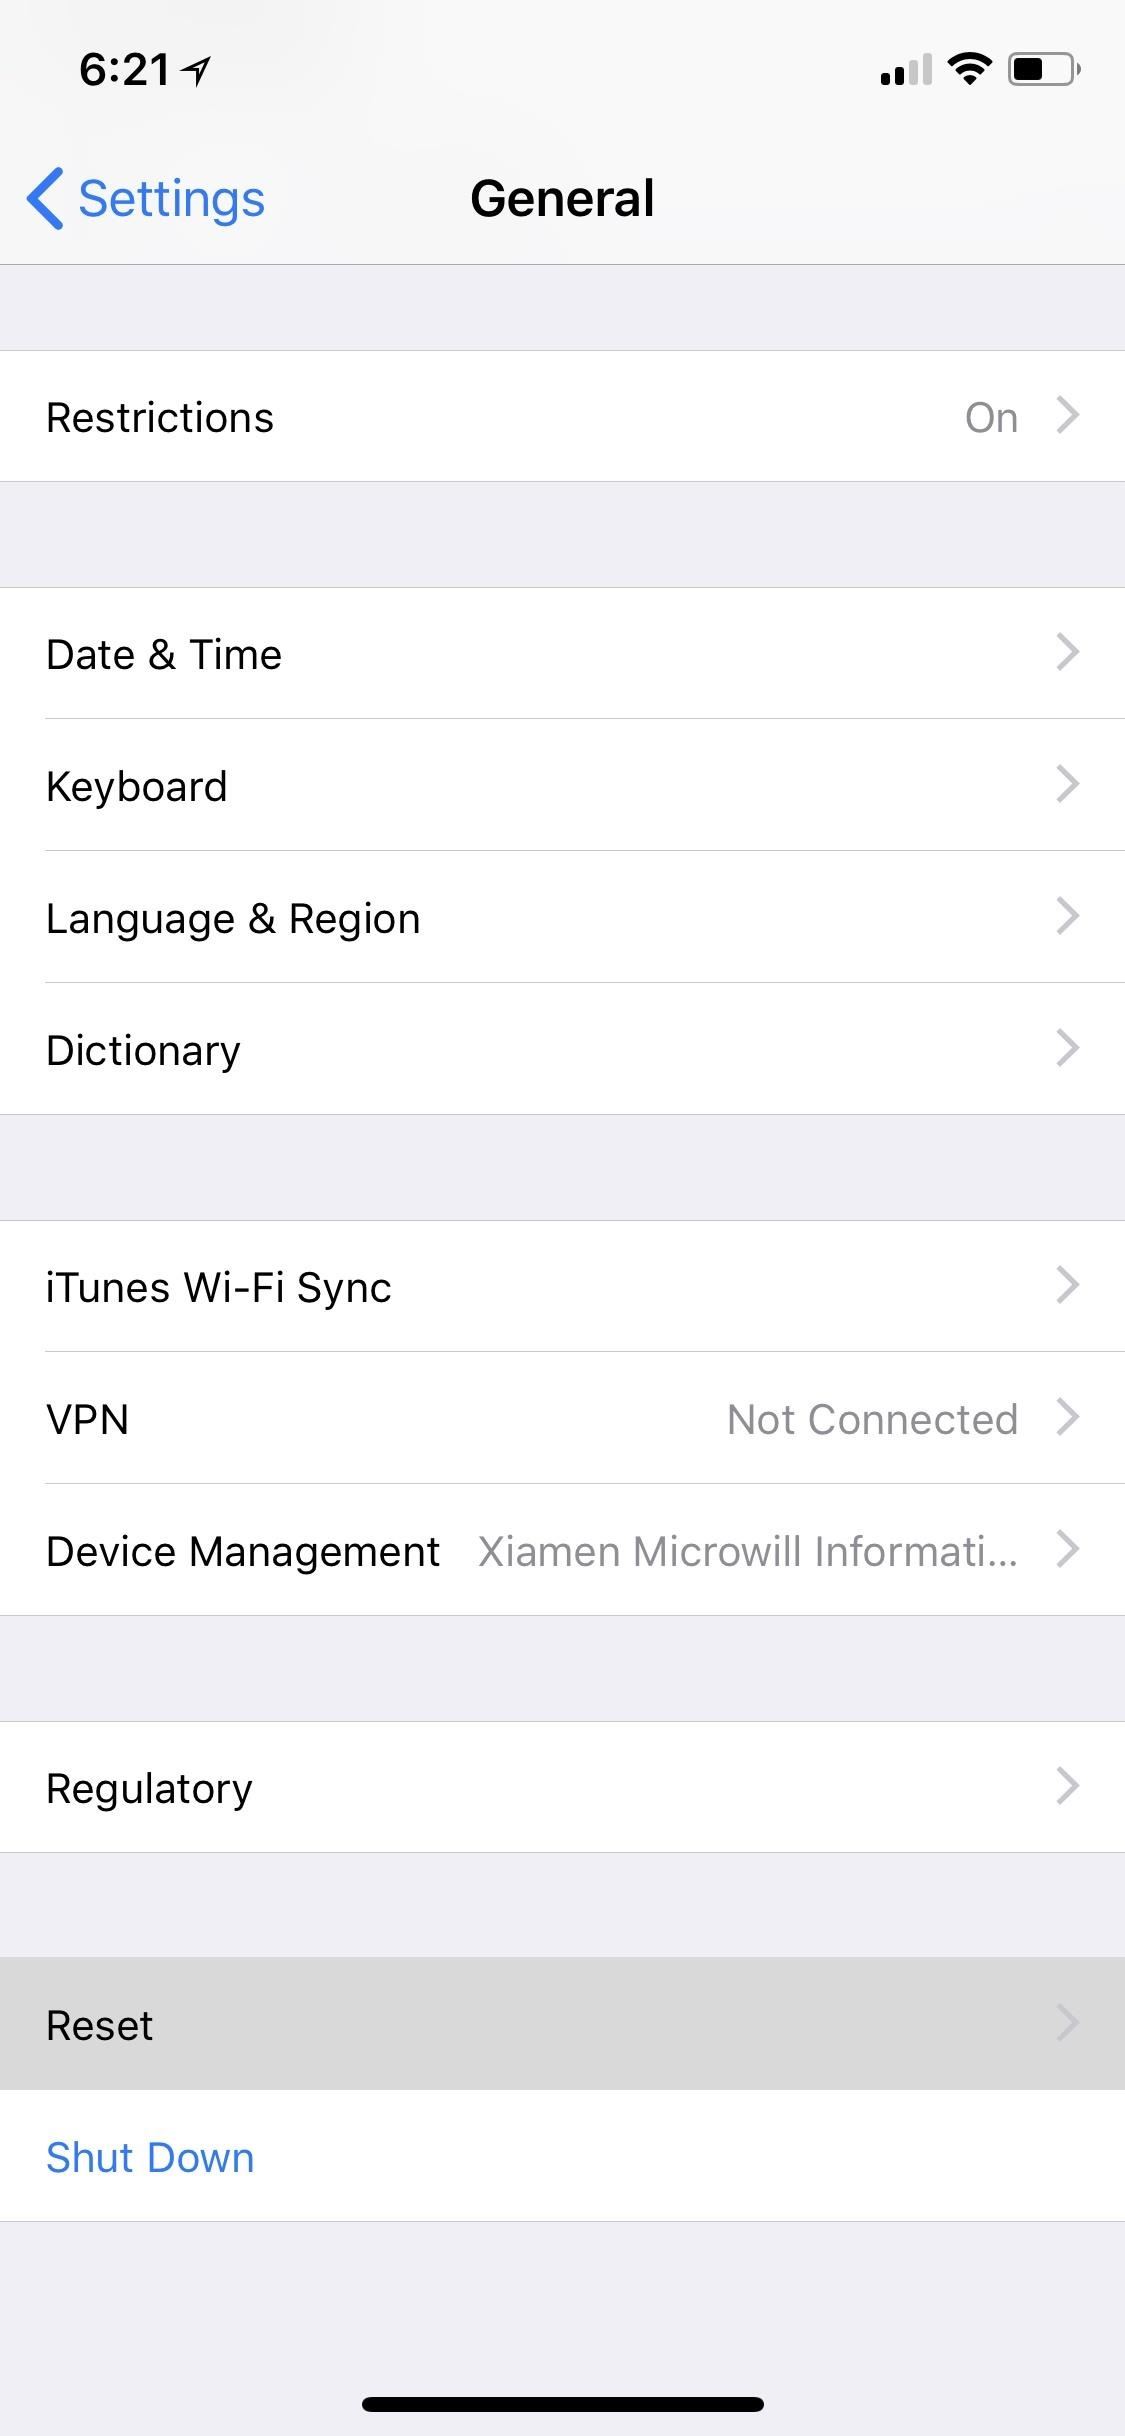 How to Find Missing Apps on Your iPhone